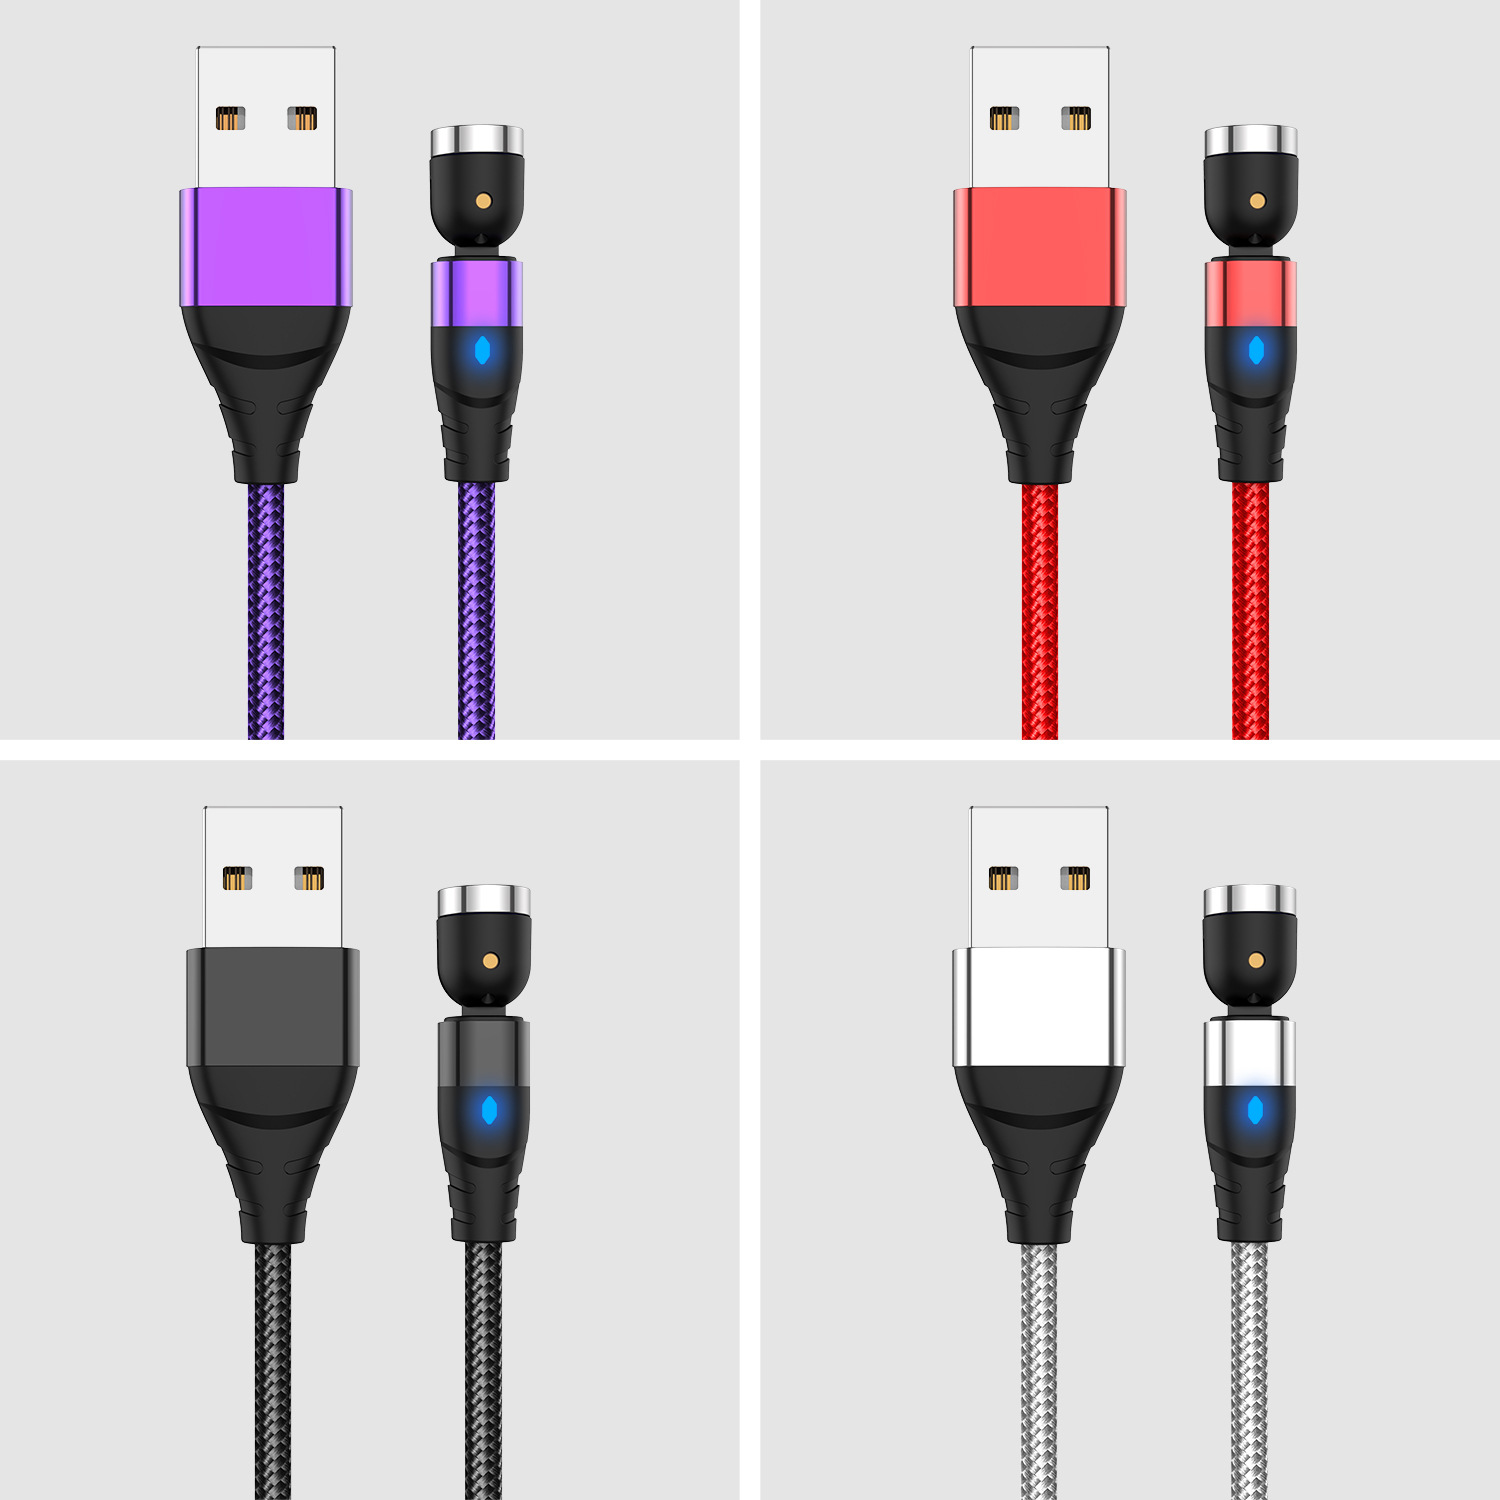 USLION 3 In 1 3A Magnetic USB to USB-C/Micro USB Data Cable 540° Rotation Fast Charging Data Transmission Cord Line 0.5m/1m/2m long For Samsung Galaxy Note 20 For iPad Pro 2020 MacBook Air 2020 Mi 10 Huawei P40 OnePlus 8 OnePlus 8 Pro